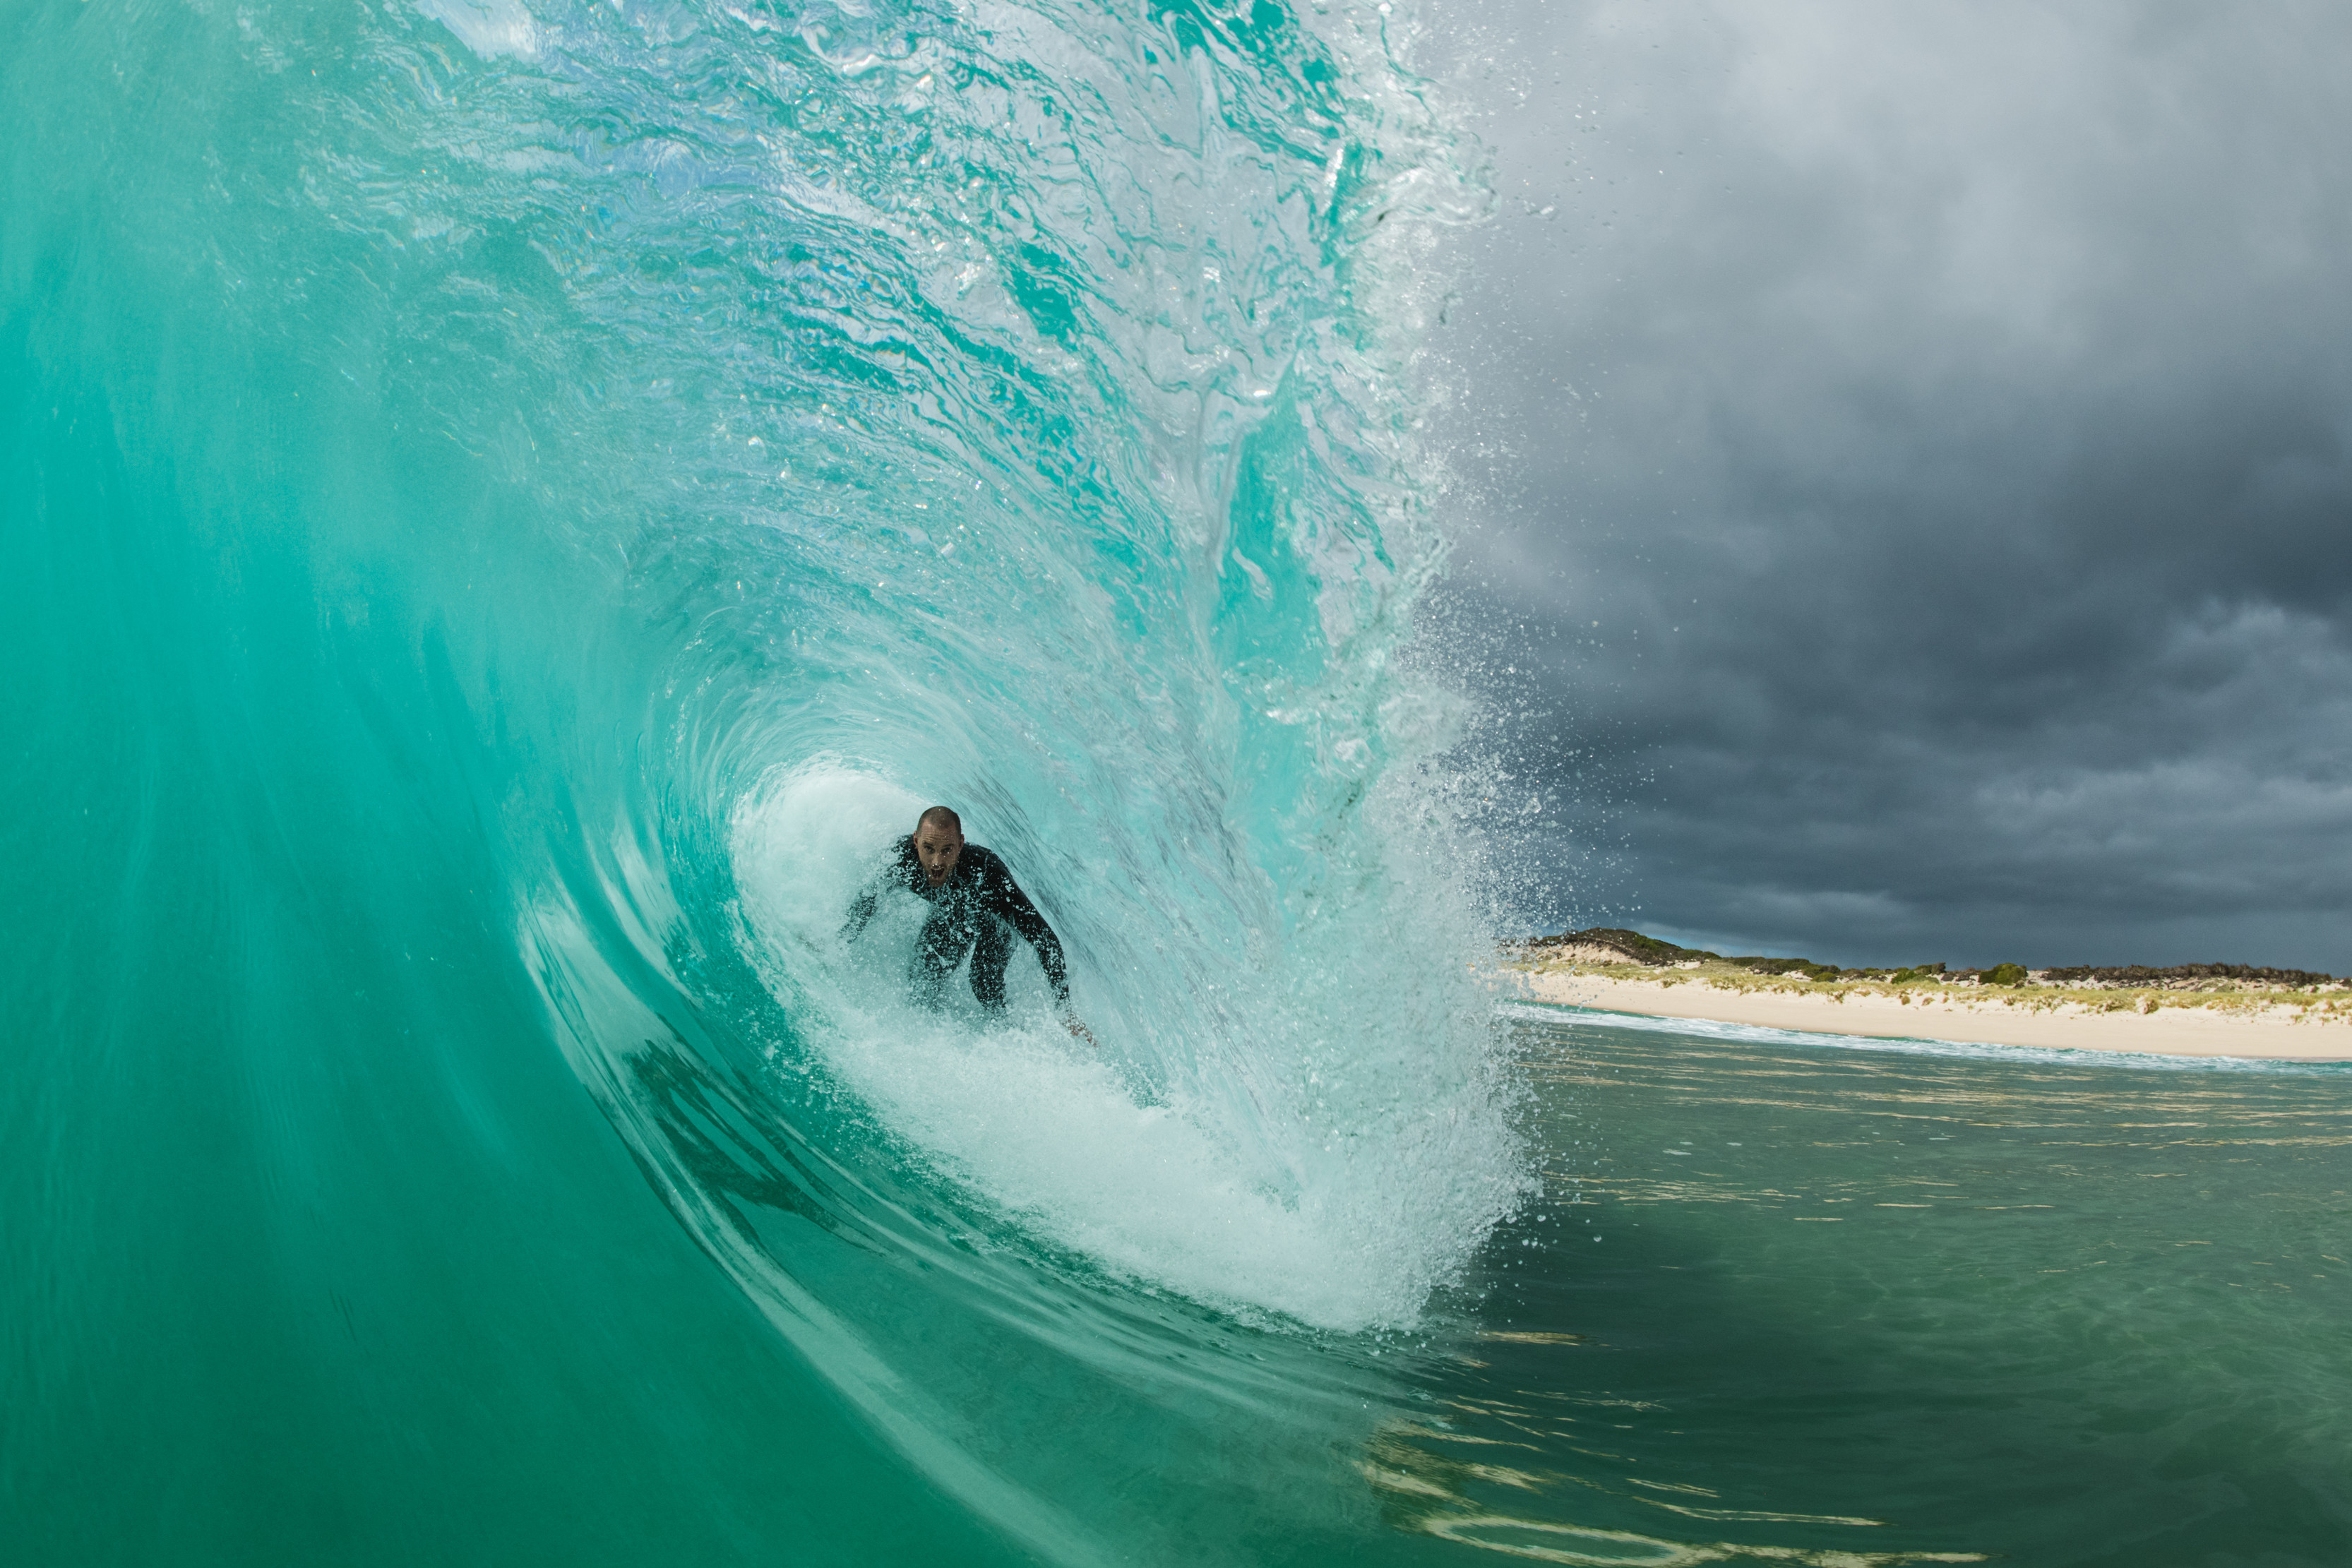 Incredible image of a person in crystal blue hollow wave at Martha Lavinia Beach, King Island.